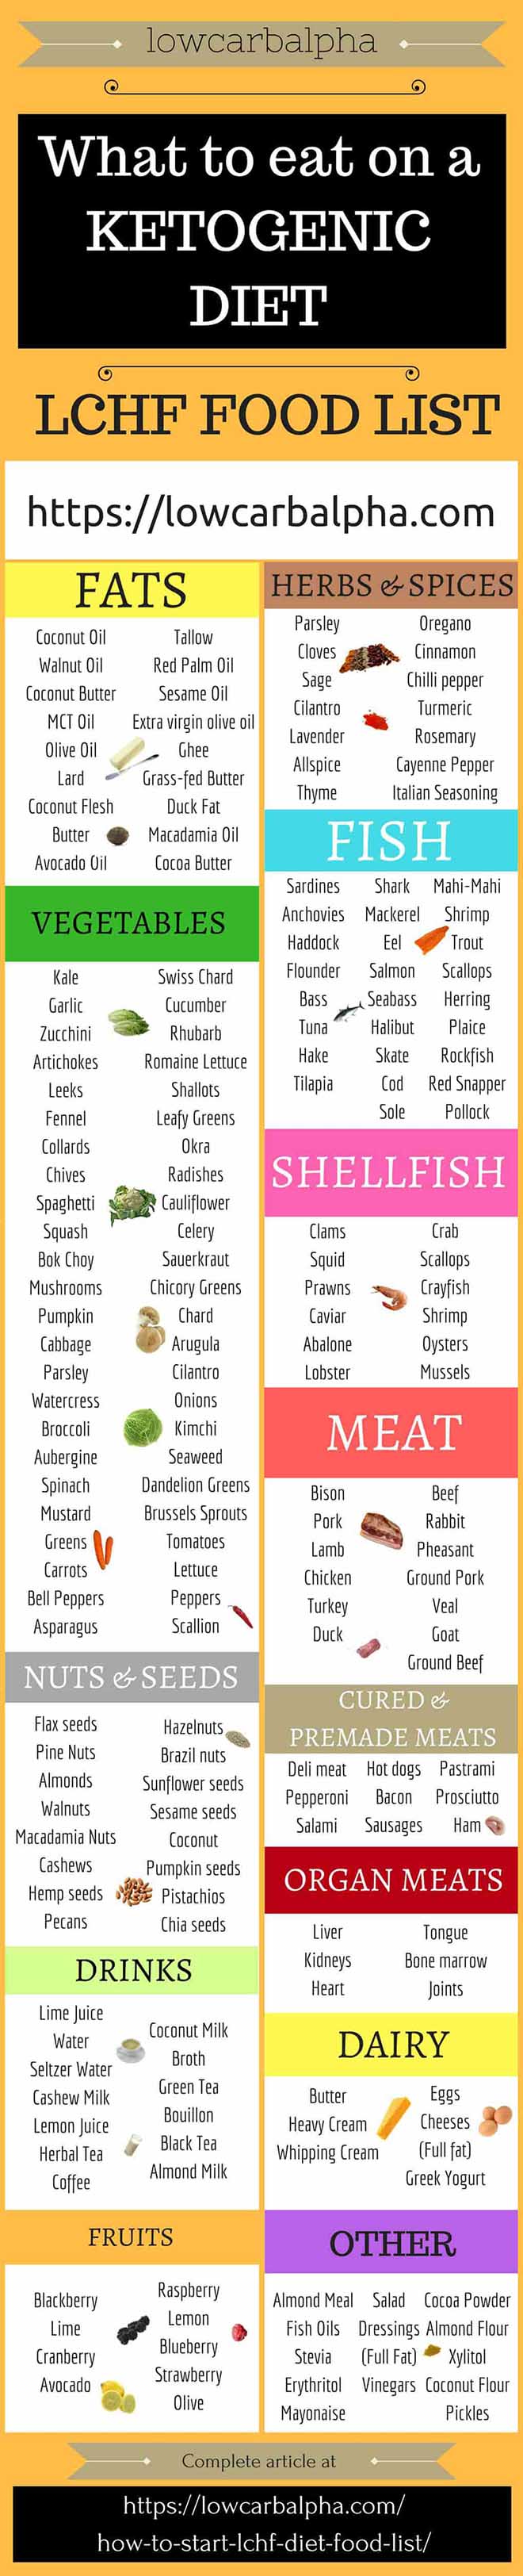 How to start LCHF diet food list #lowcarb #keto #LCHF #lowcarbalpha